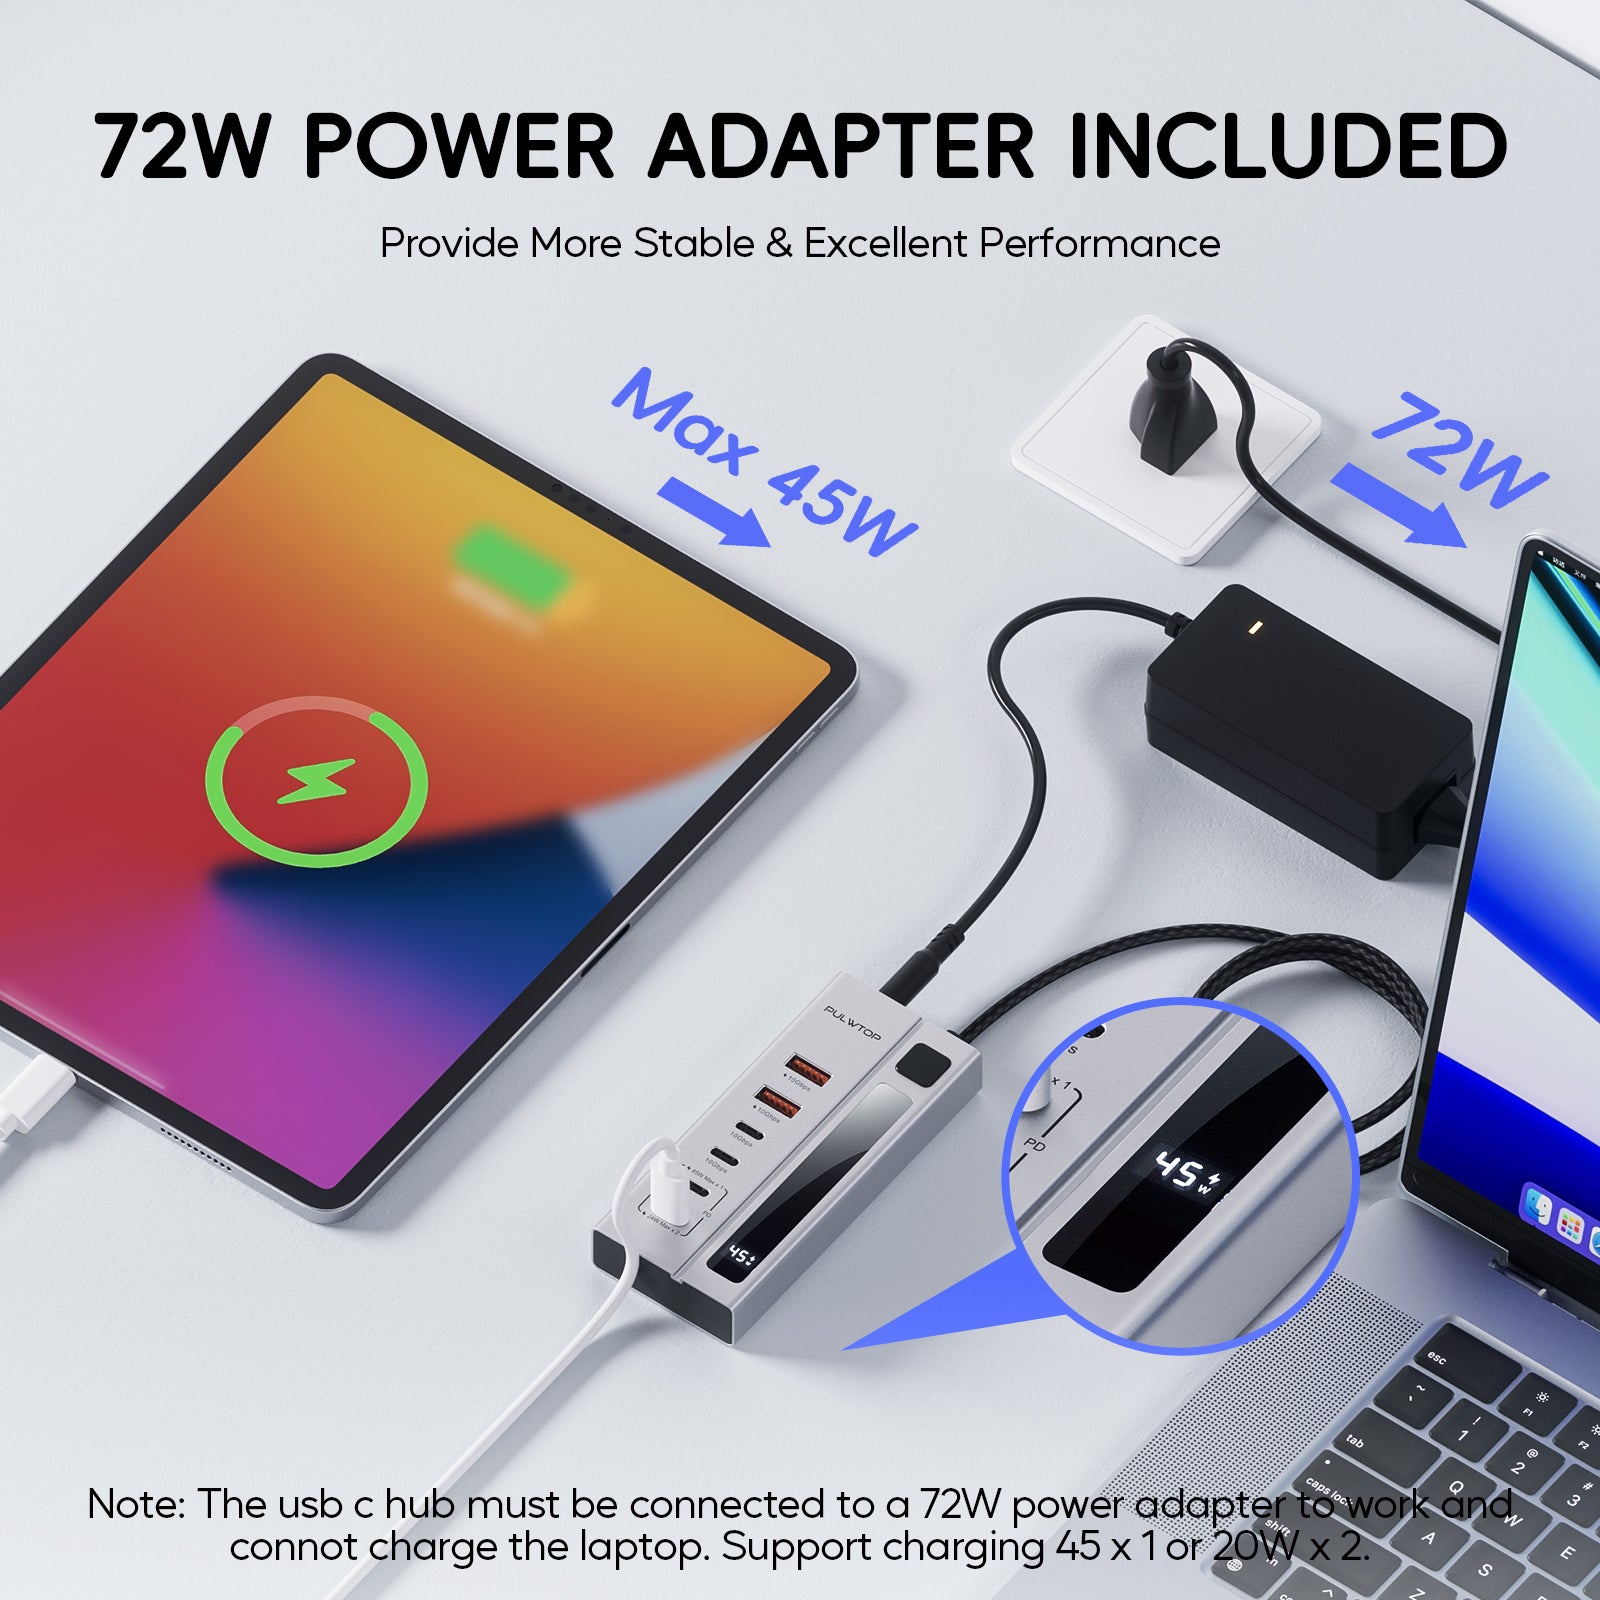 PULWTOP Powered USB C Hub with 72W Power Adapter, 10Gbps and 45W (Max) USB C Hub for MacBook, iMac, iPad, Phone (Not for Video)